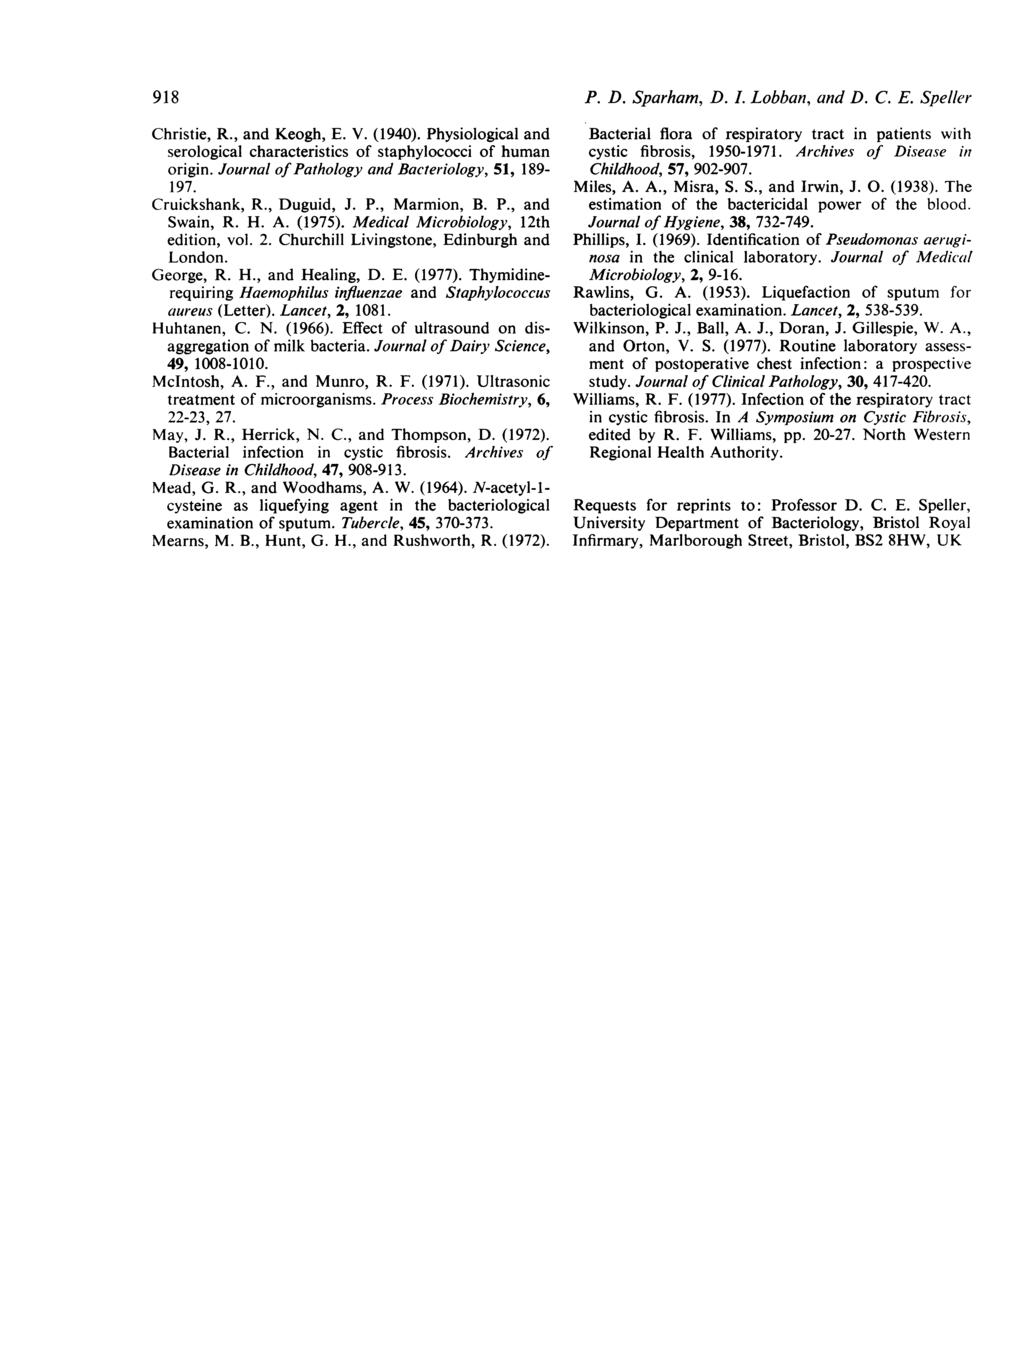 918 P. D. Sparham, D. I. Lobban, and D. C. E. Speller Christie, R., and Keogh, E. V. (1940). Physiological and serological characteristics of staphylococci of human origin.